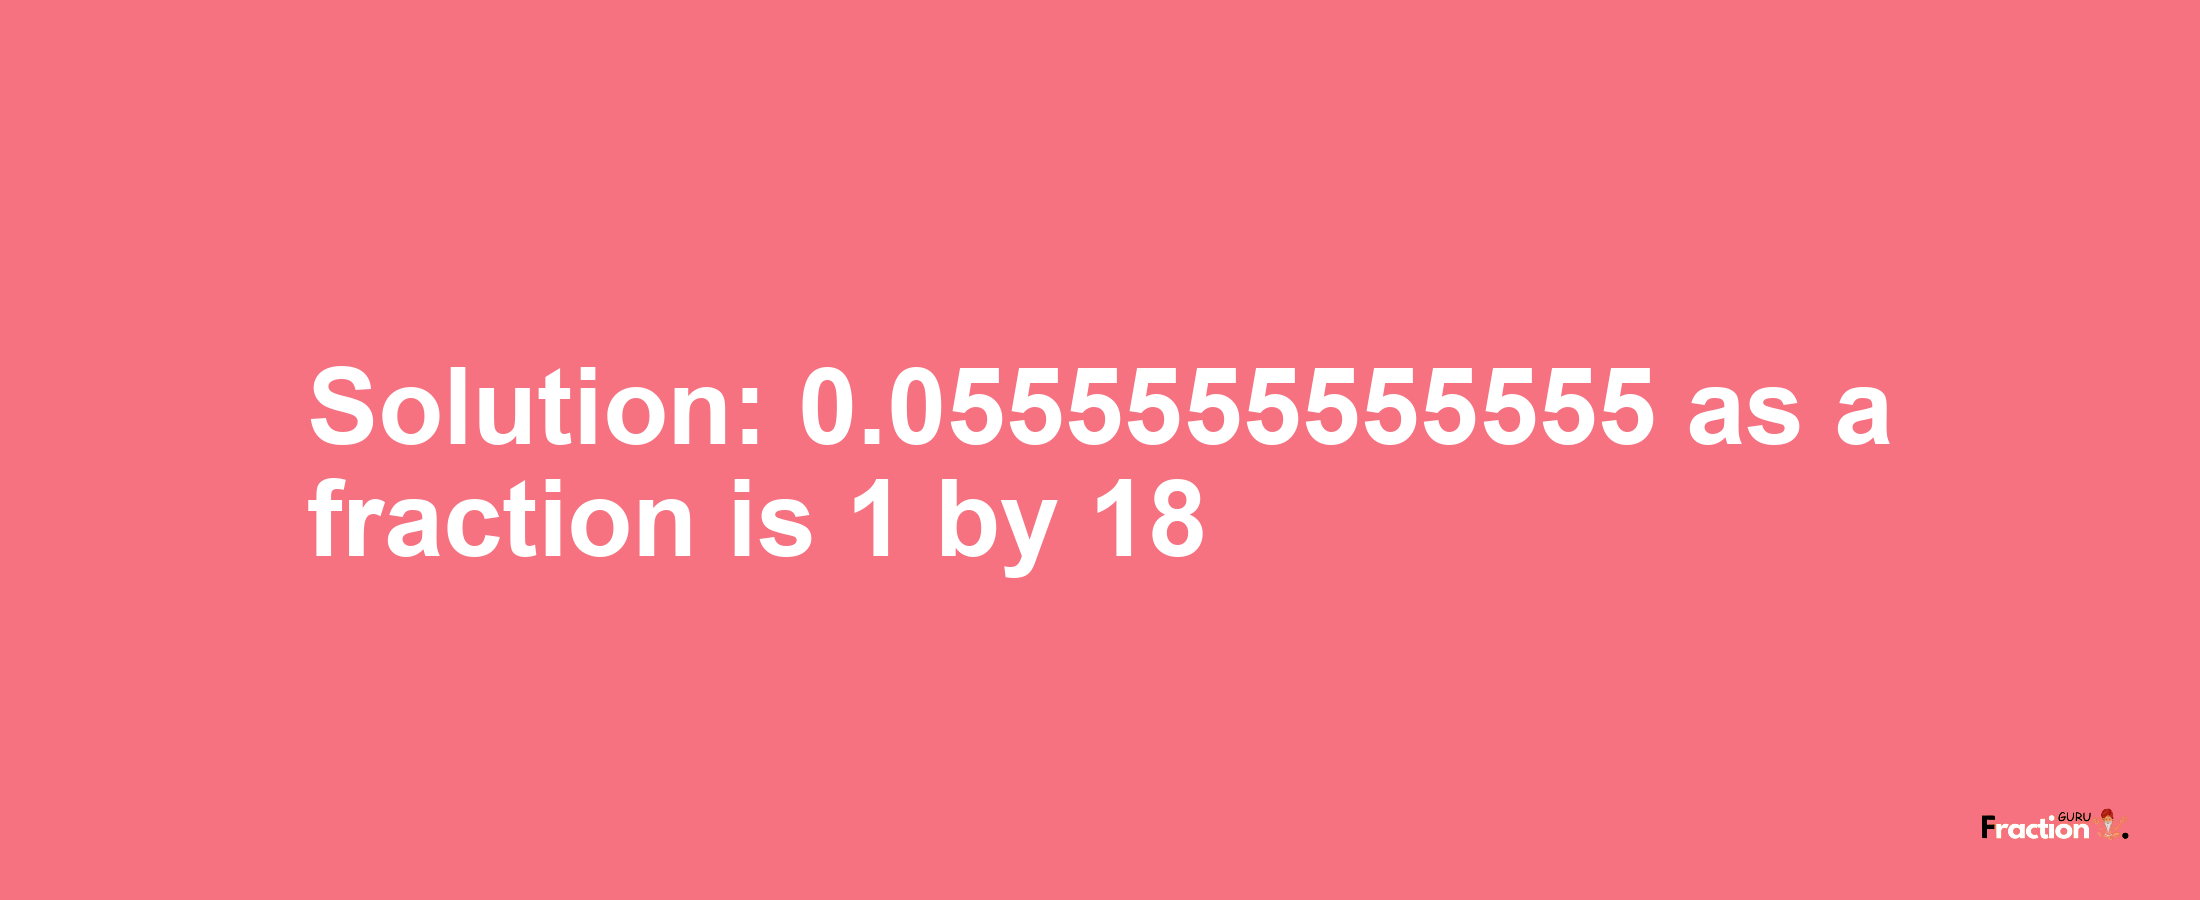 Solution:0.0555555555555 as a fraction is 1/18